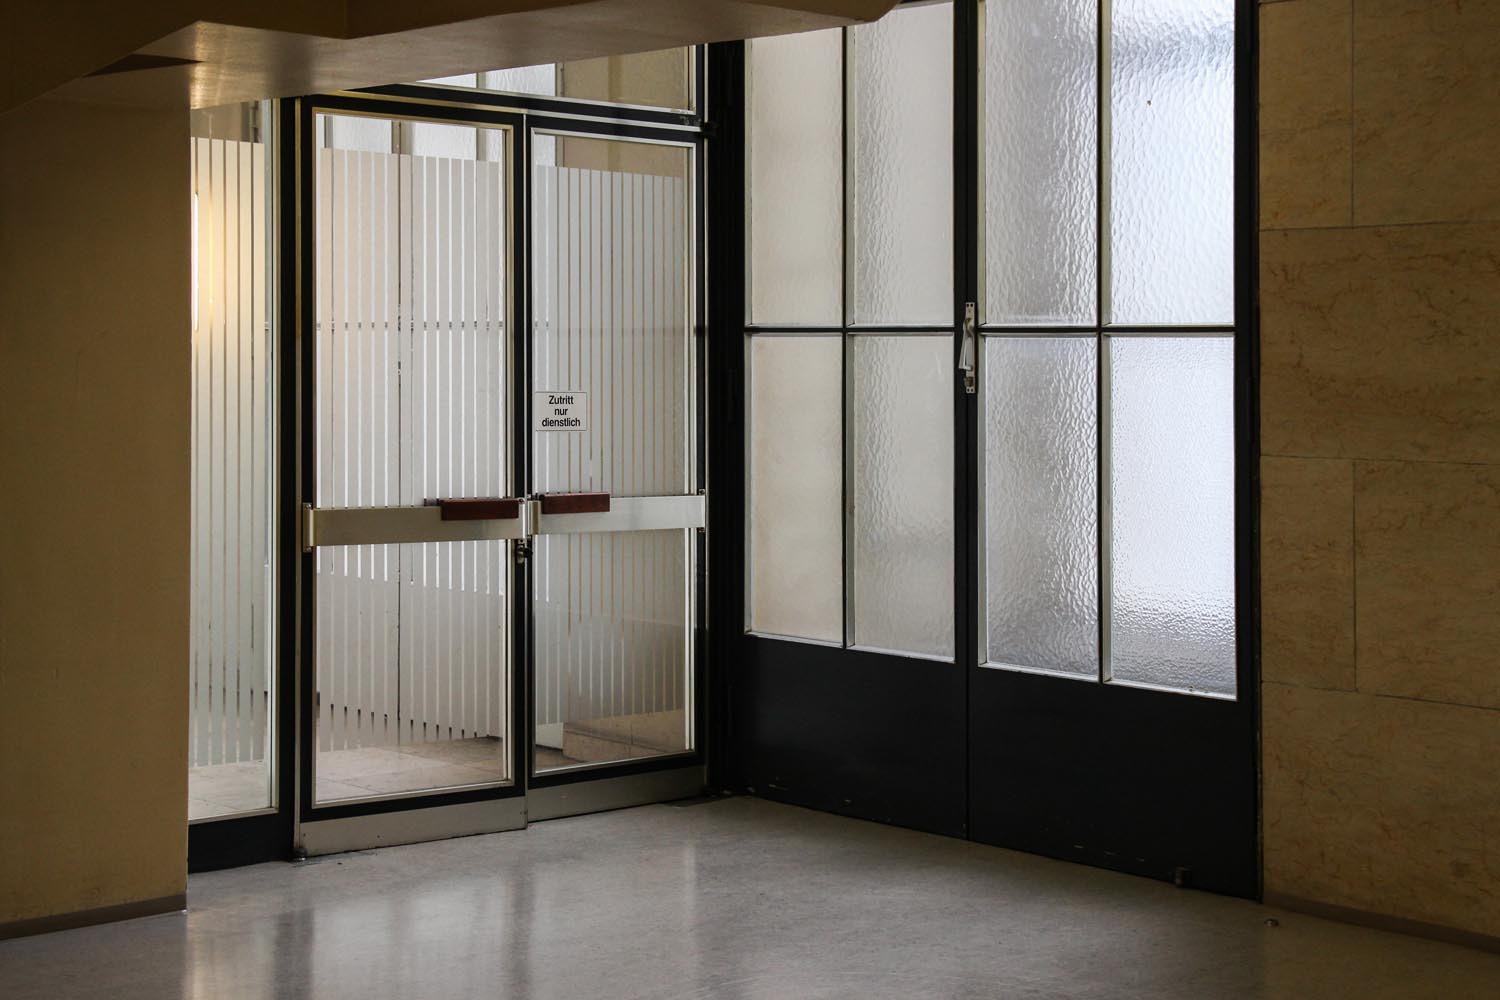 An automatic swinging door for ADA accessibility